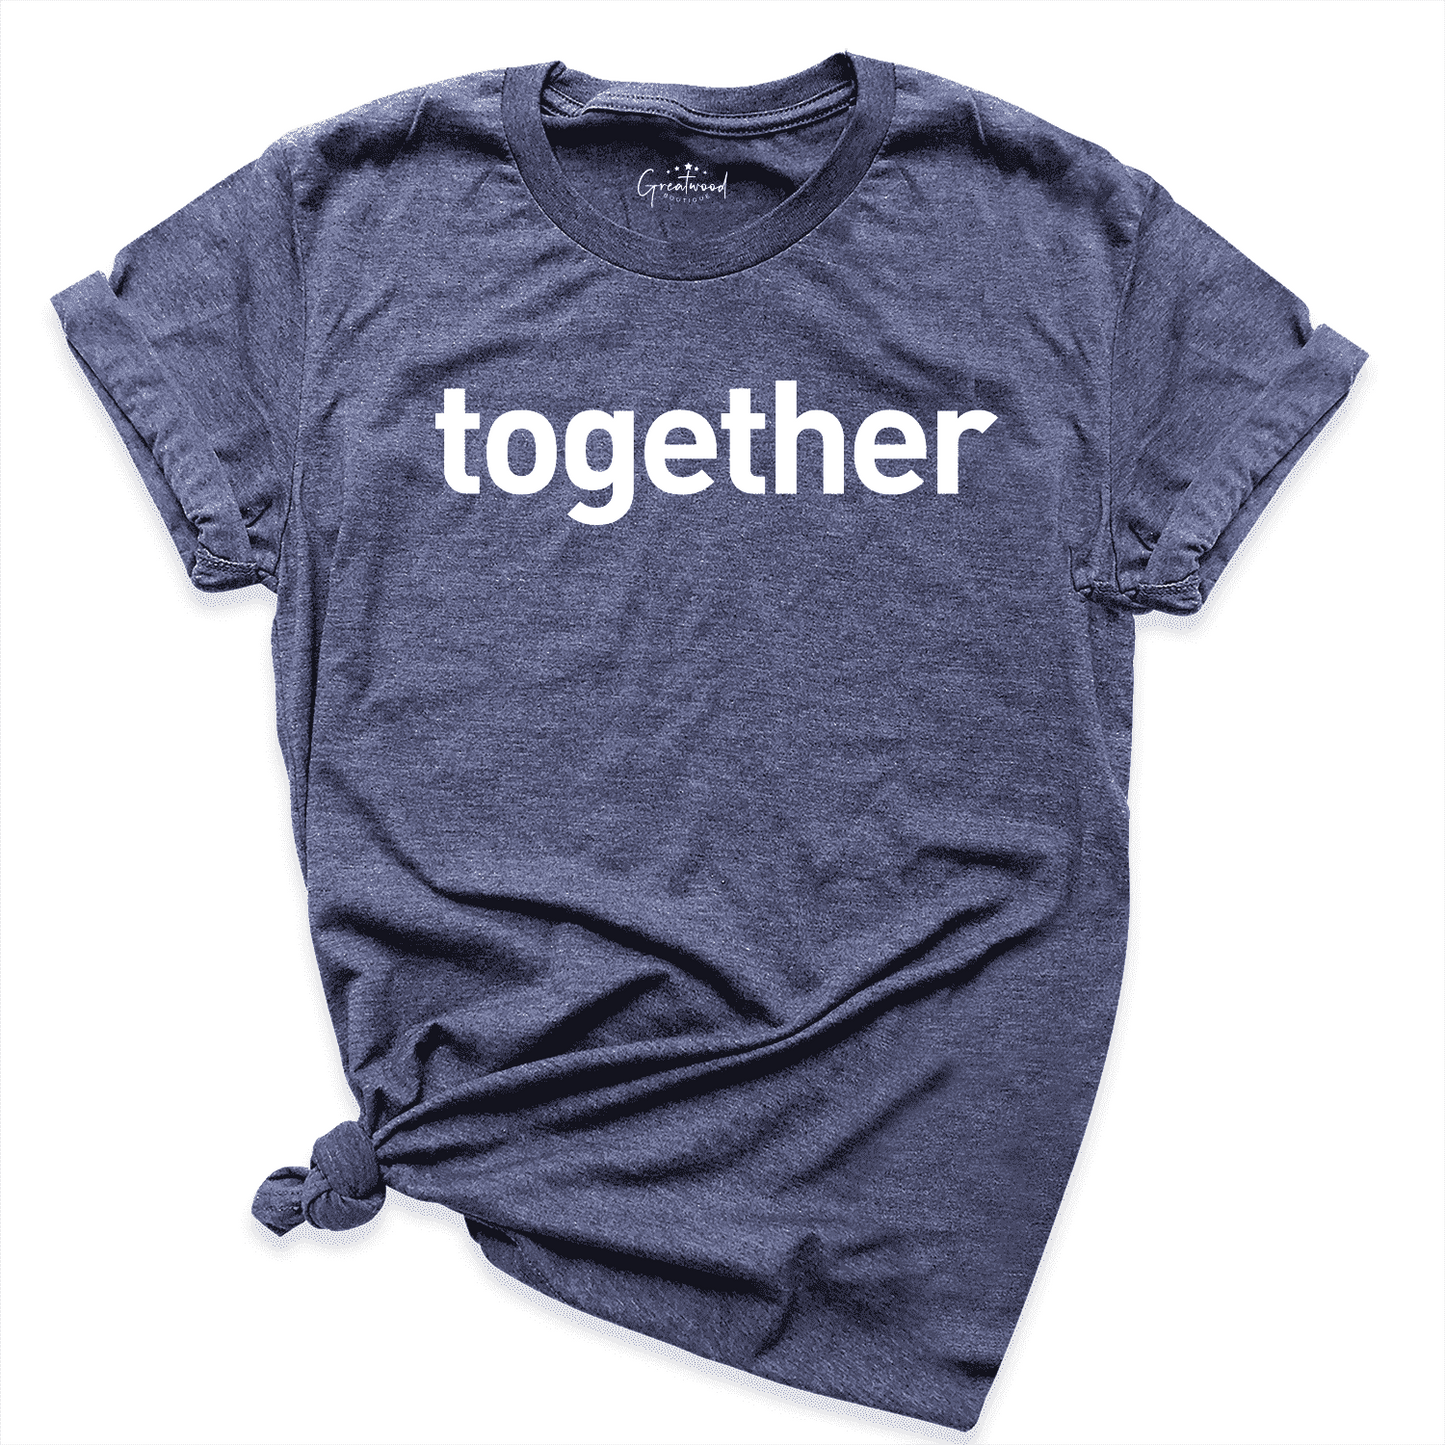 Together Shirt Navy - Greatwood Boutique